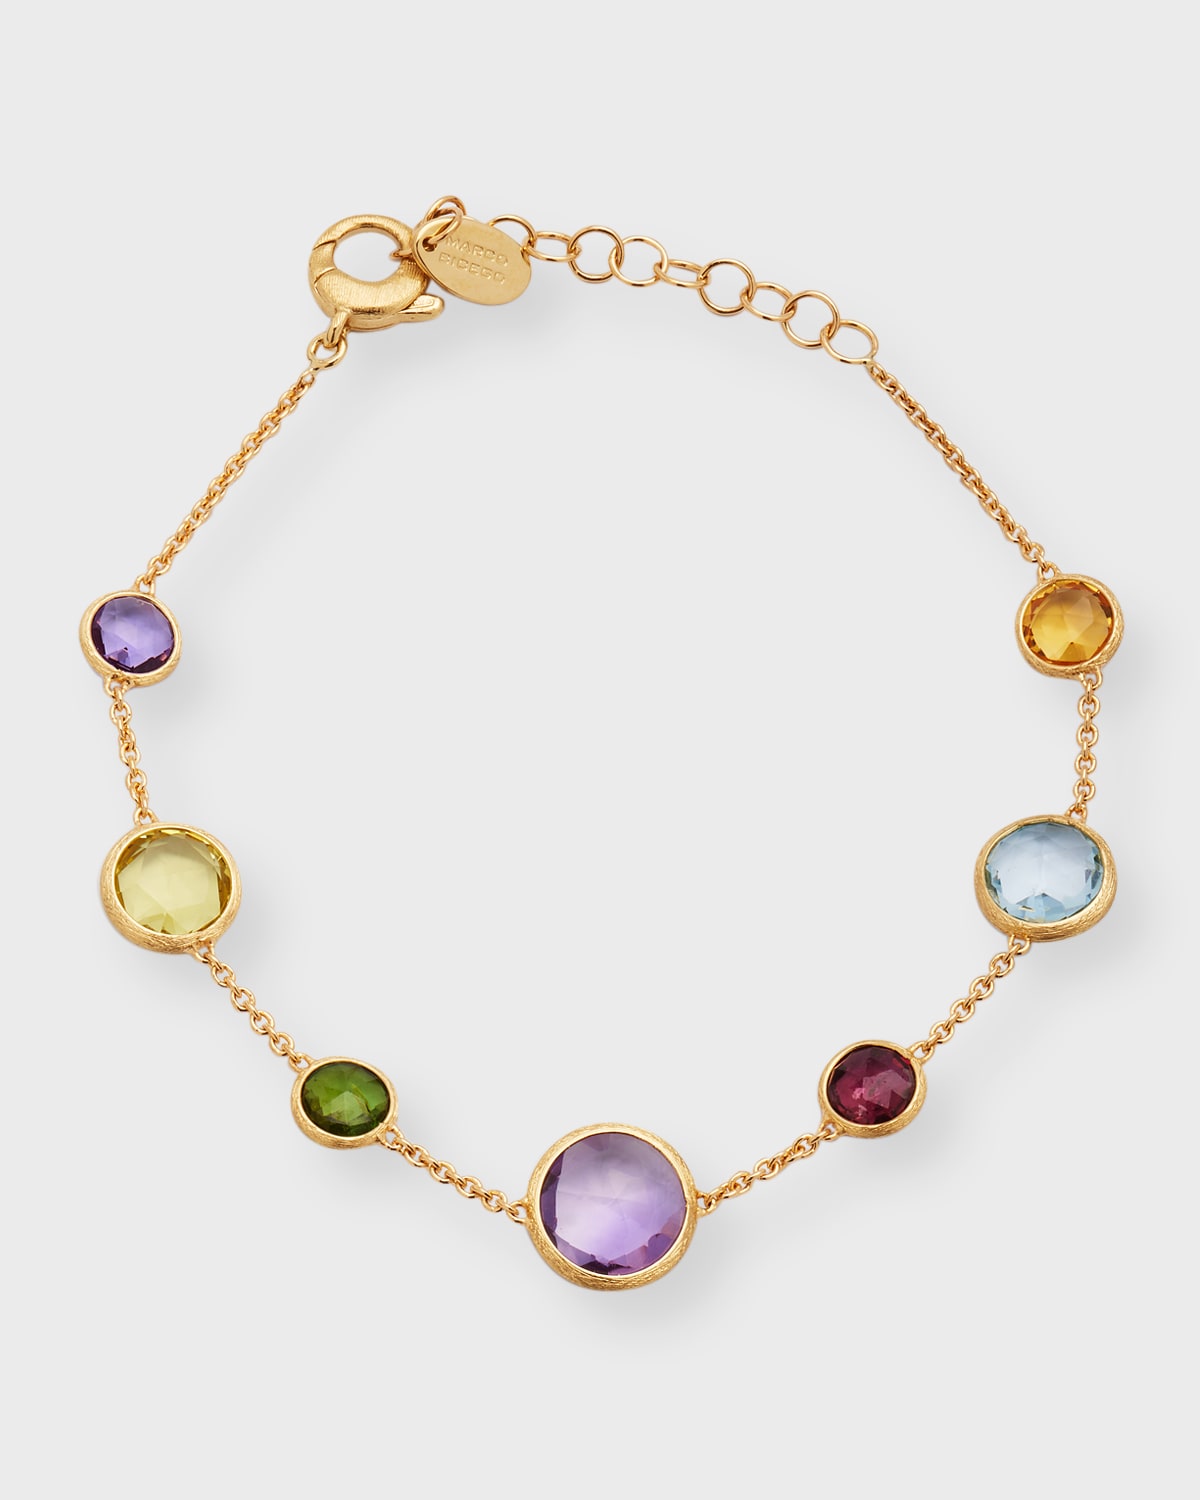 Marco Bicego Jaipur Color Single Strand Bracelet with Mixed Stones